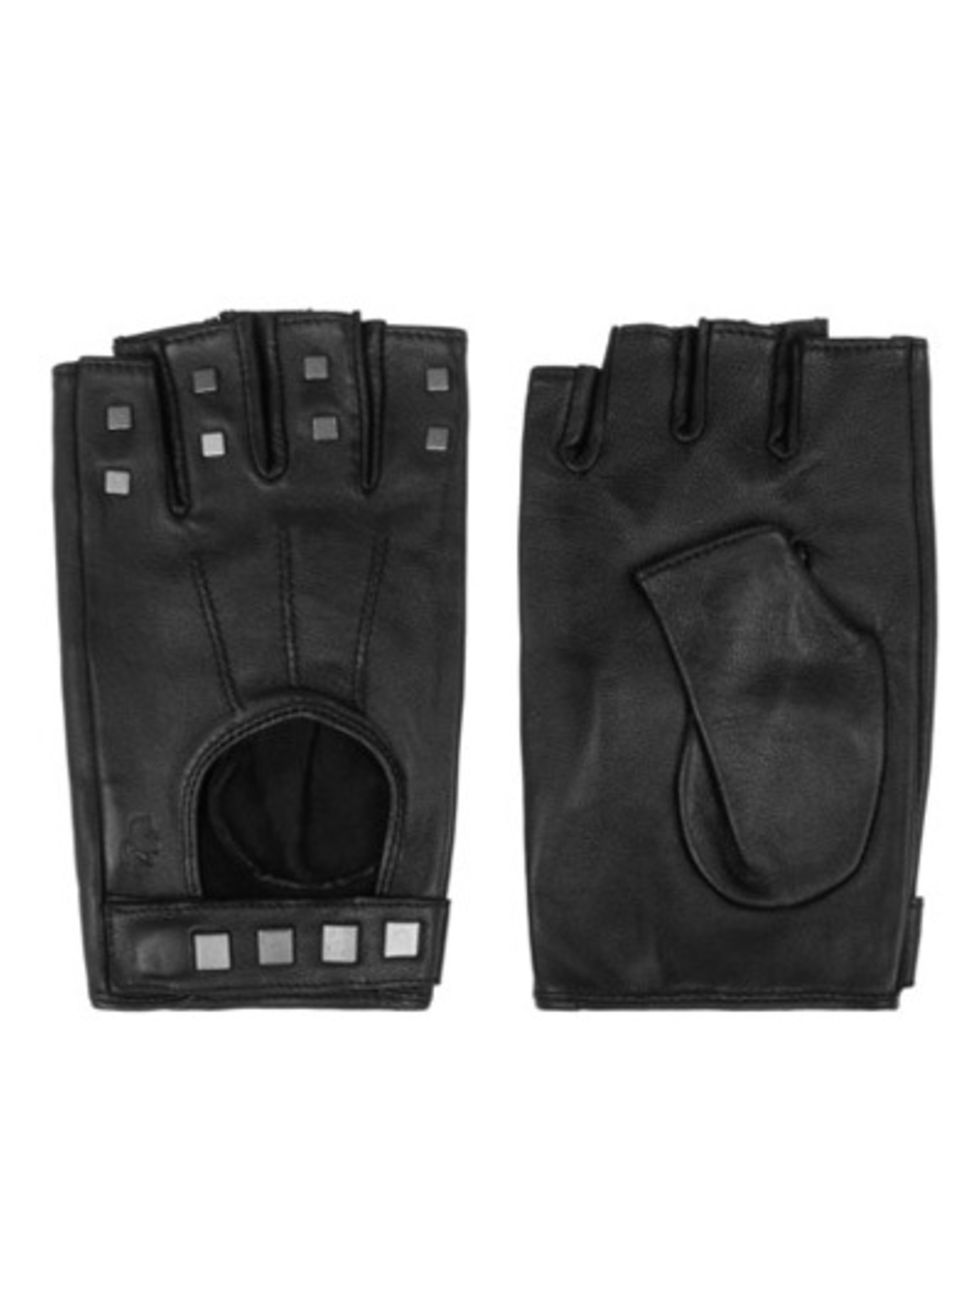 Personal protective equipment, White, Glove, Black, Grey, Safety glove, Sports gear, Leather, Gesture, Boot, 